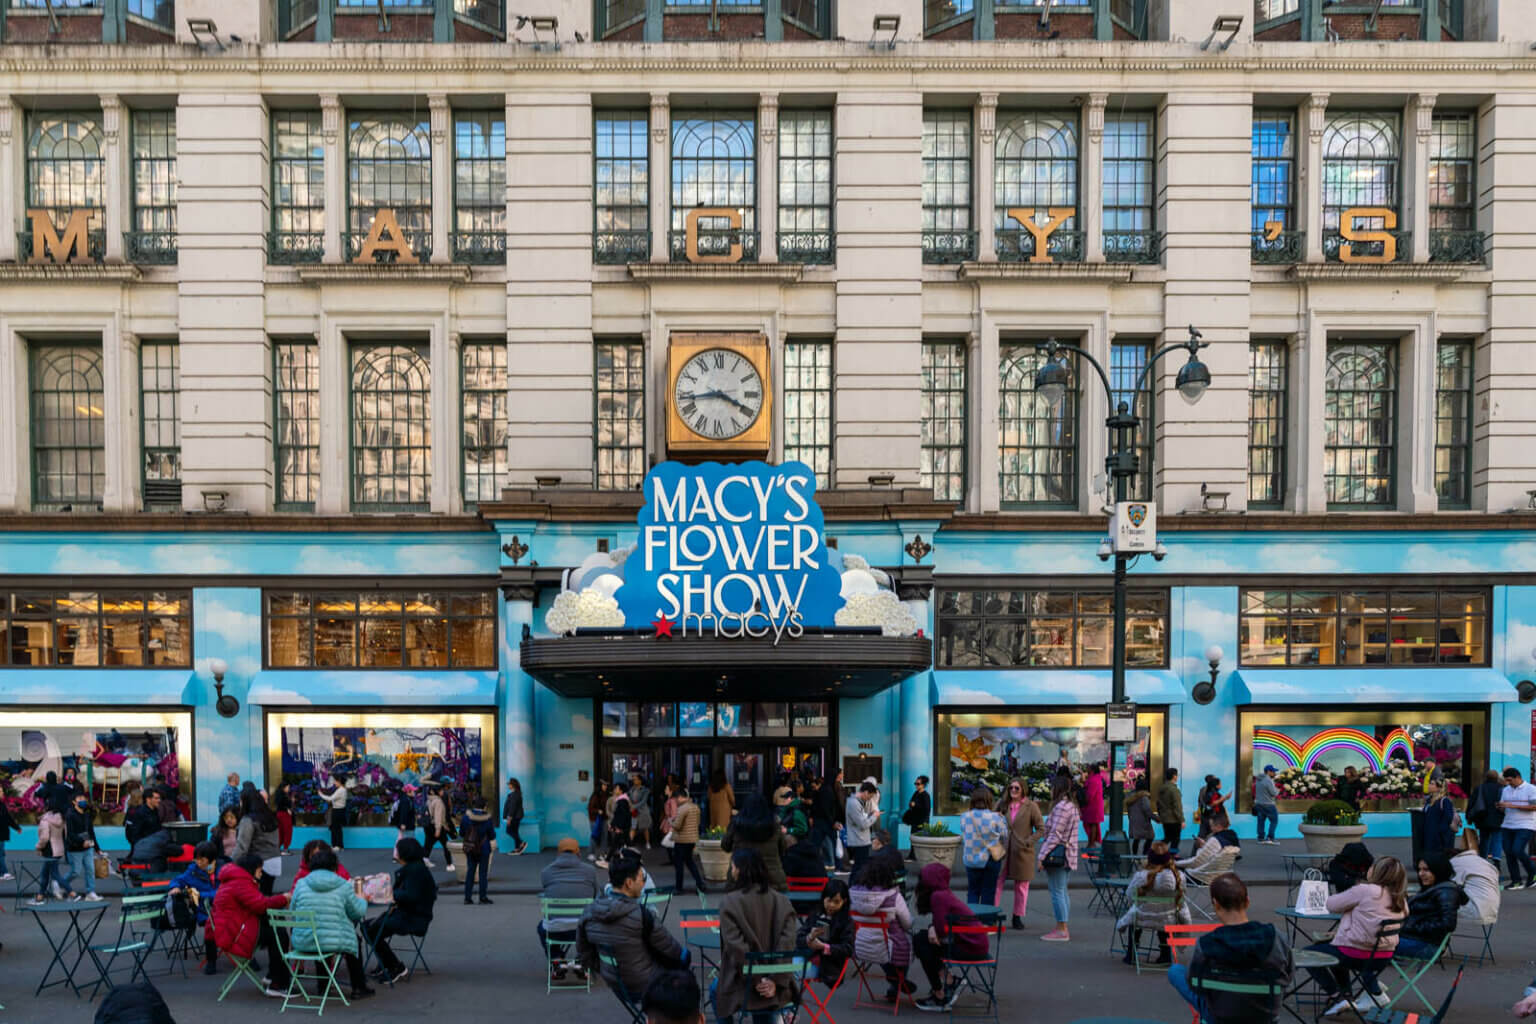 Macys Flower Show exterior decor for 2023 in NYC in Spring